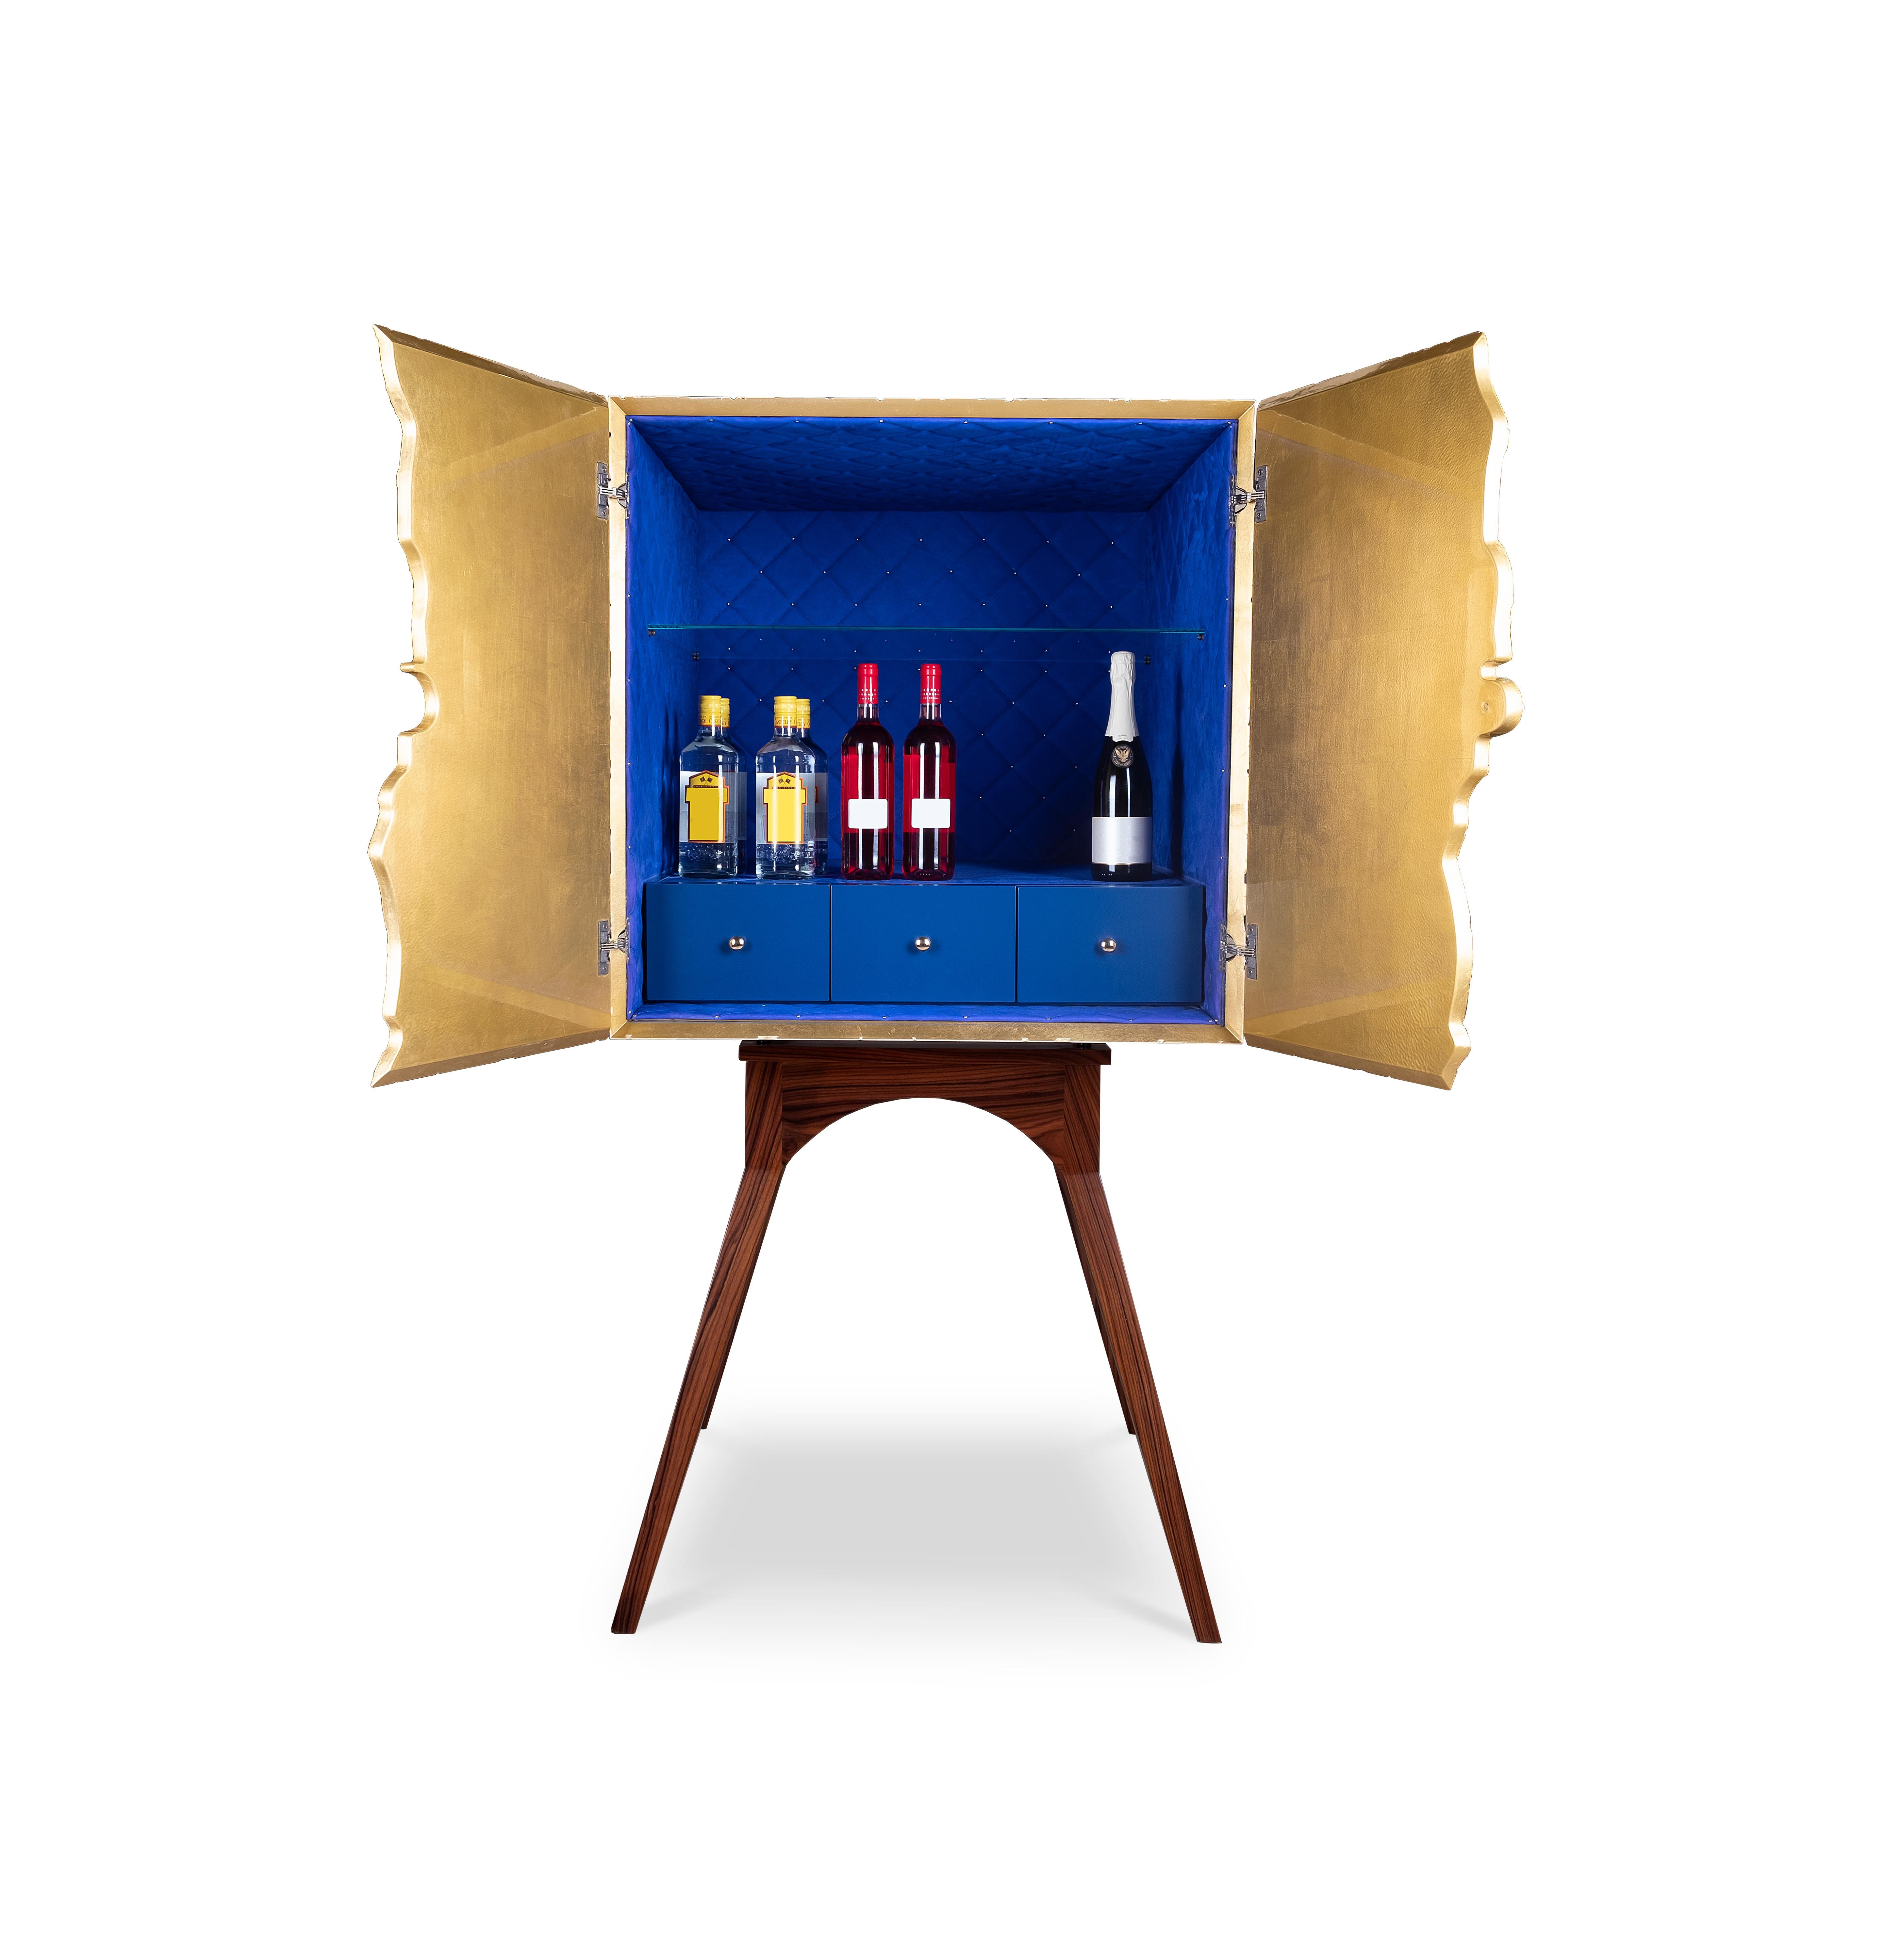 The Templo contemporary cabinet is inspired by the eccentric and unusual buildings of Gaudi, a Spanish artistic reference. In the simplest environment it exalts life and joy, conveys positive feelings and provides a unique experience of